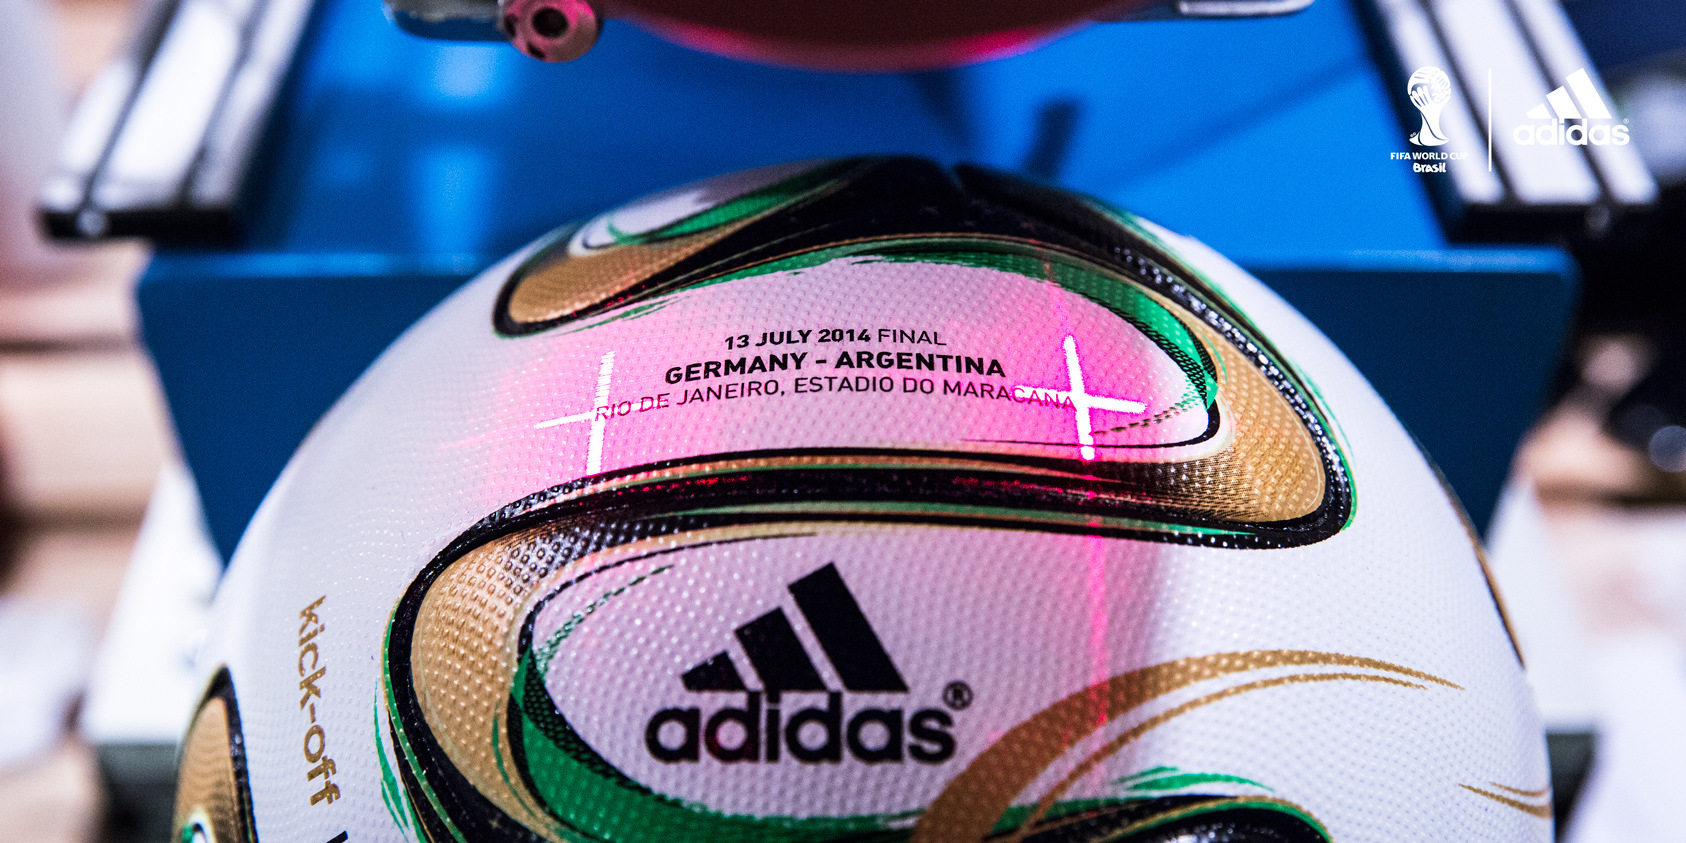 Adidas shows off the official ball to be in the World Cup final | For The Win